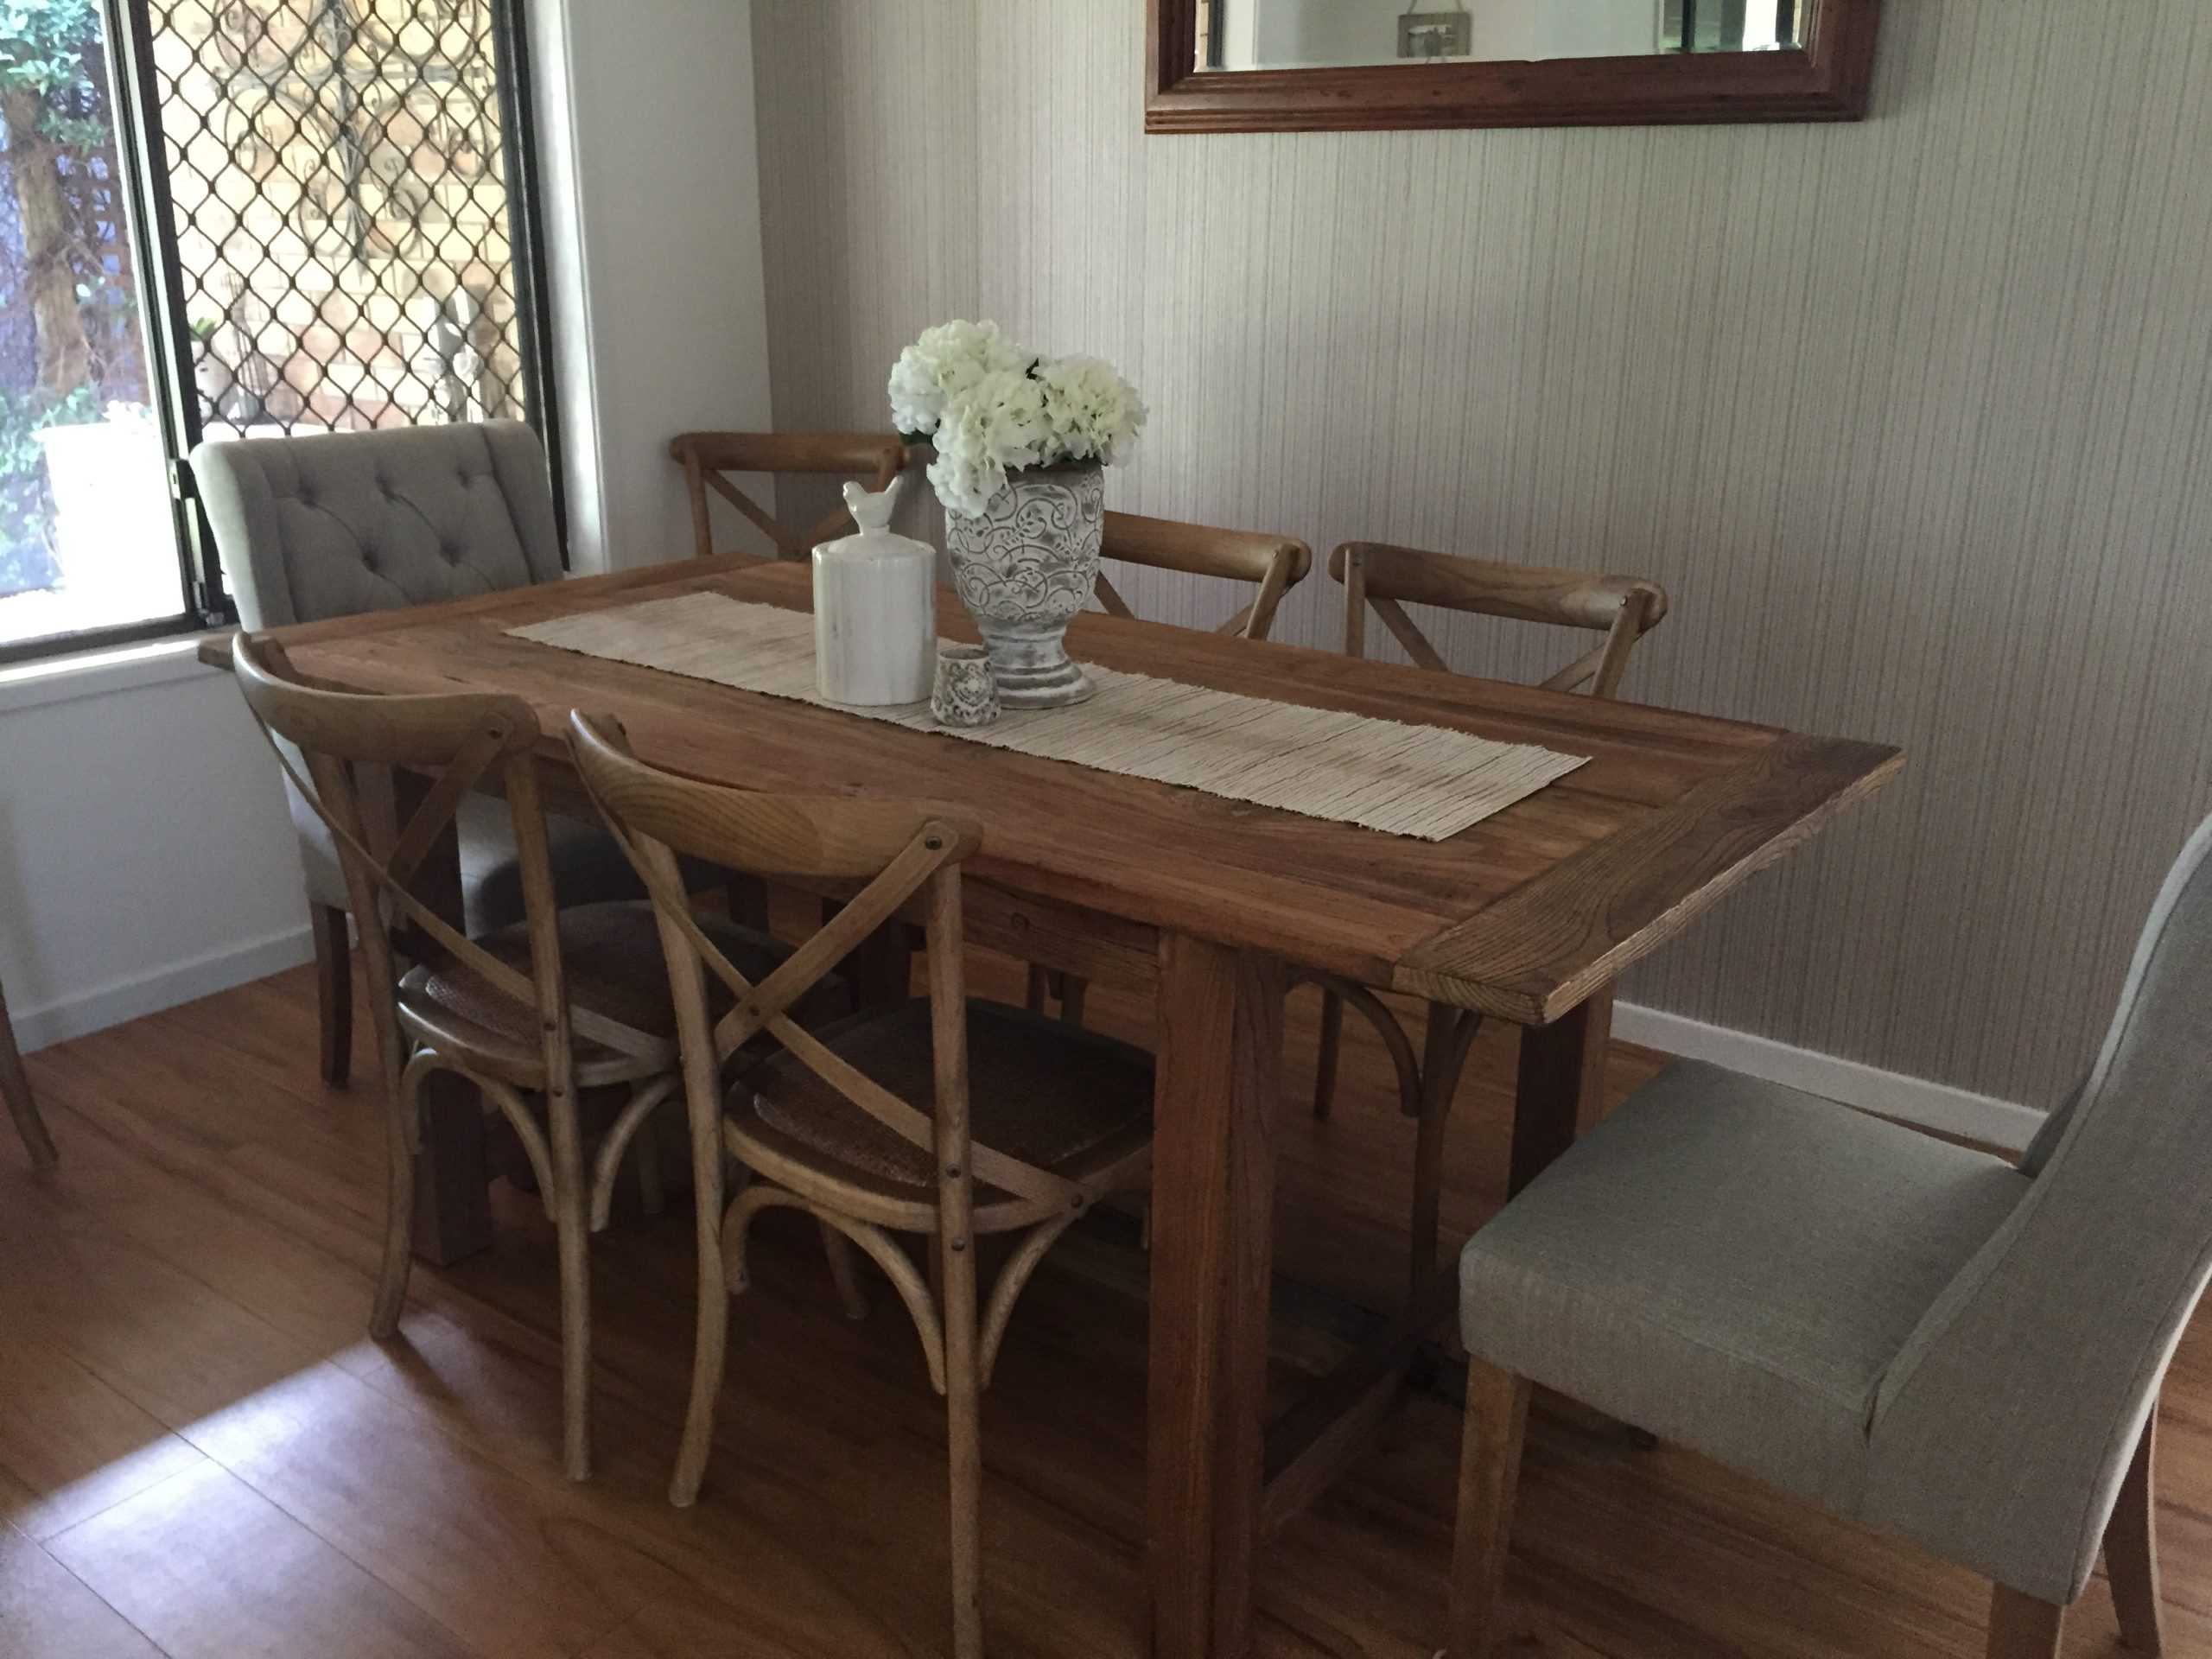 MF Farmhouse Recycled Elm Timber Dining Table